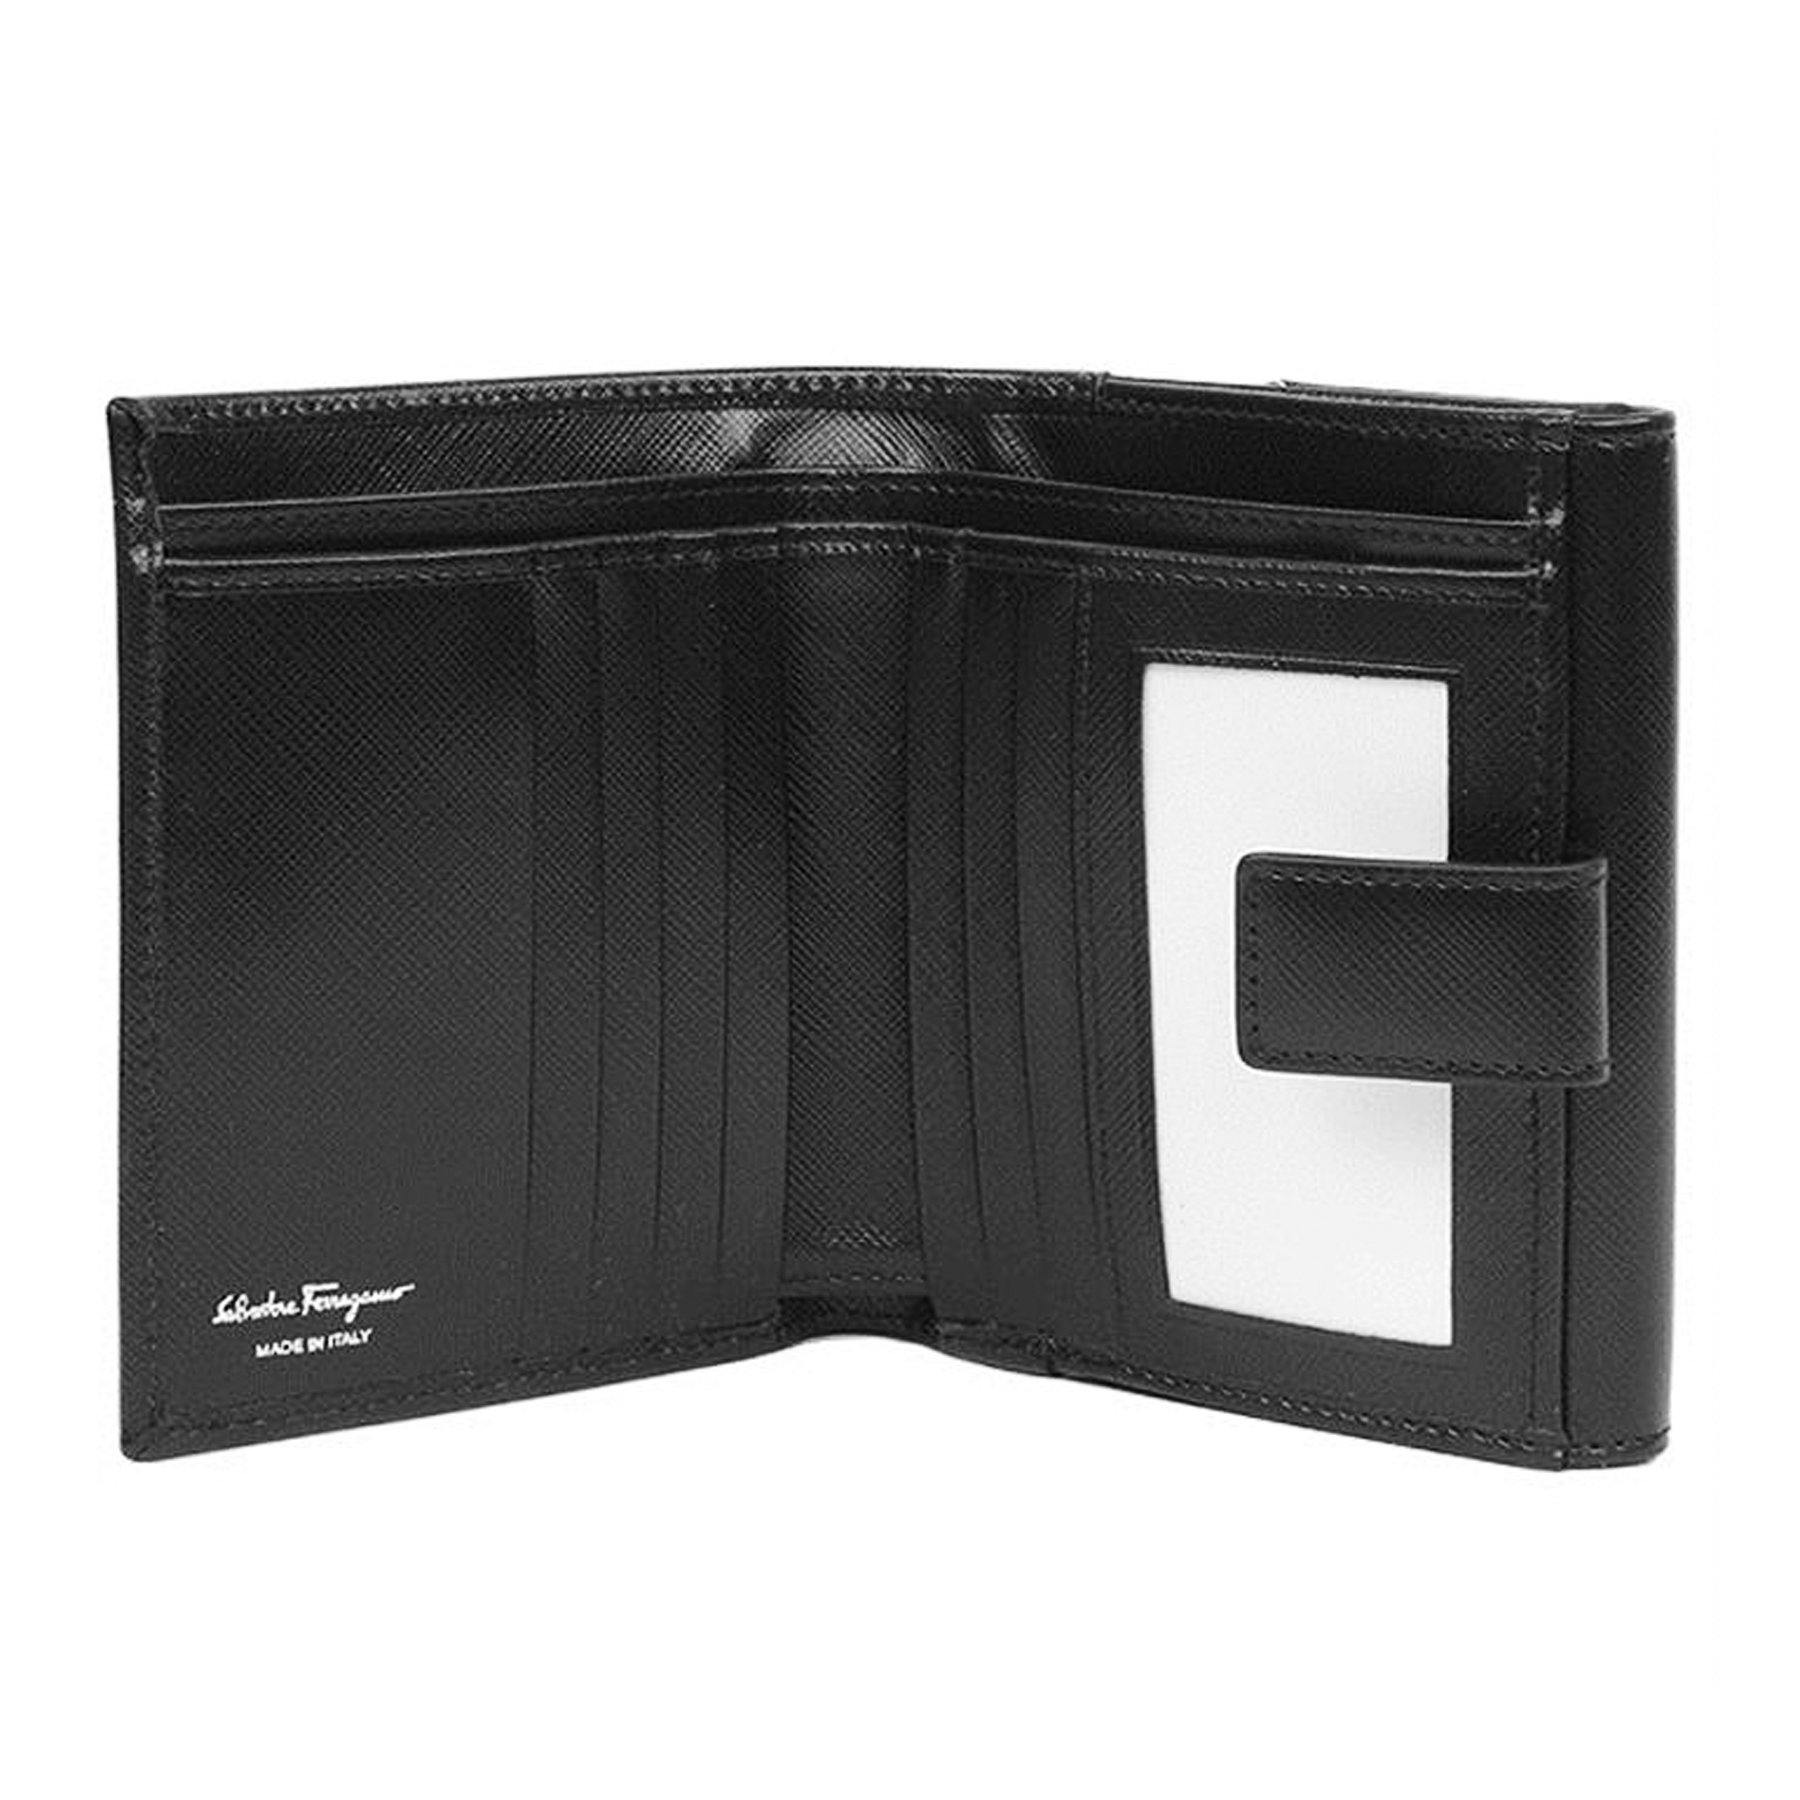 Gancini French Wallet 22 4639 - Cosmos Boutique New Jersey